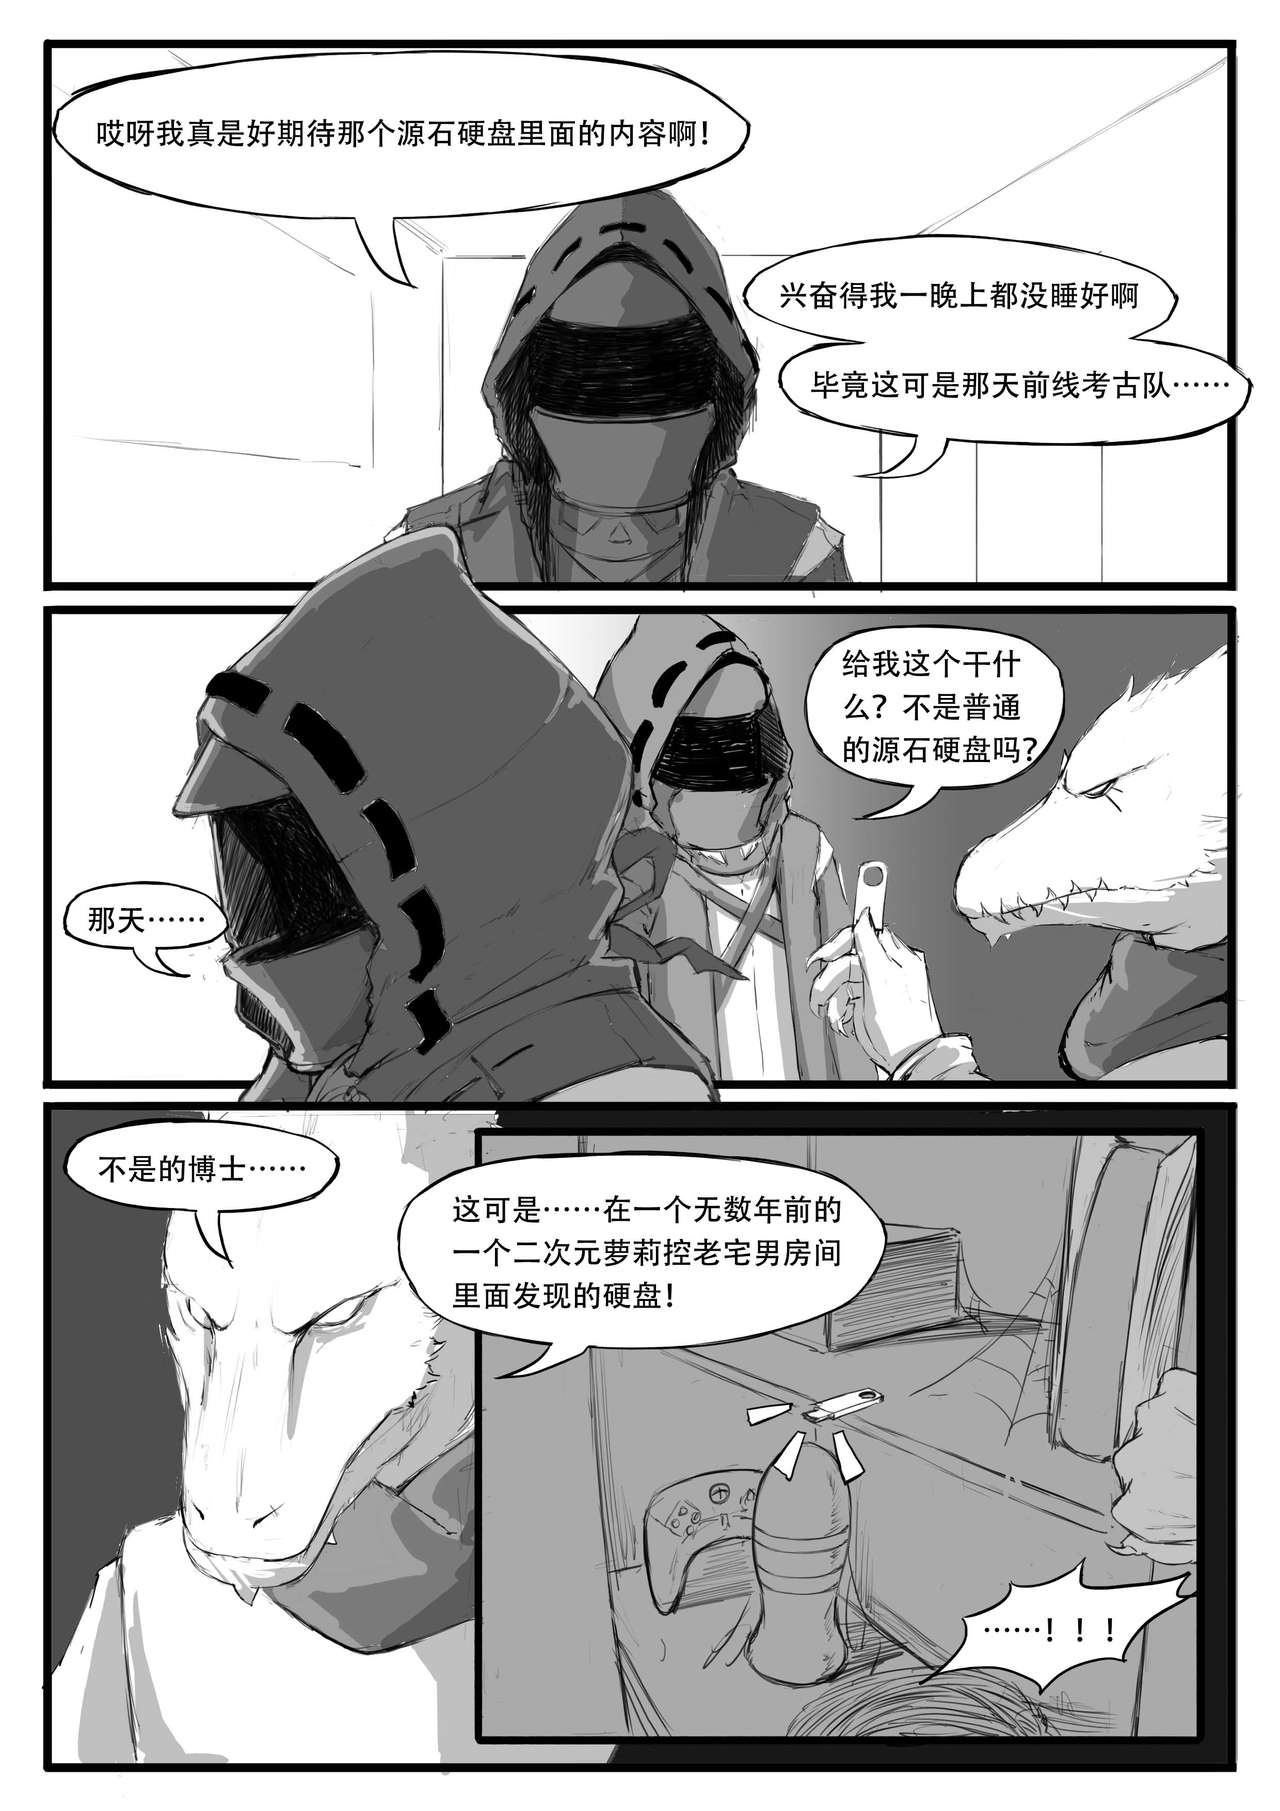 [saluky] 关于白面鸮变成了幼女这件事 (Arknights) [Chinese] page 7 full